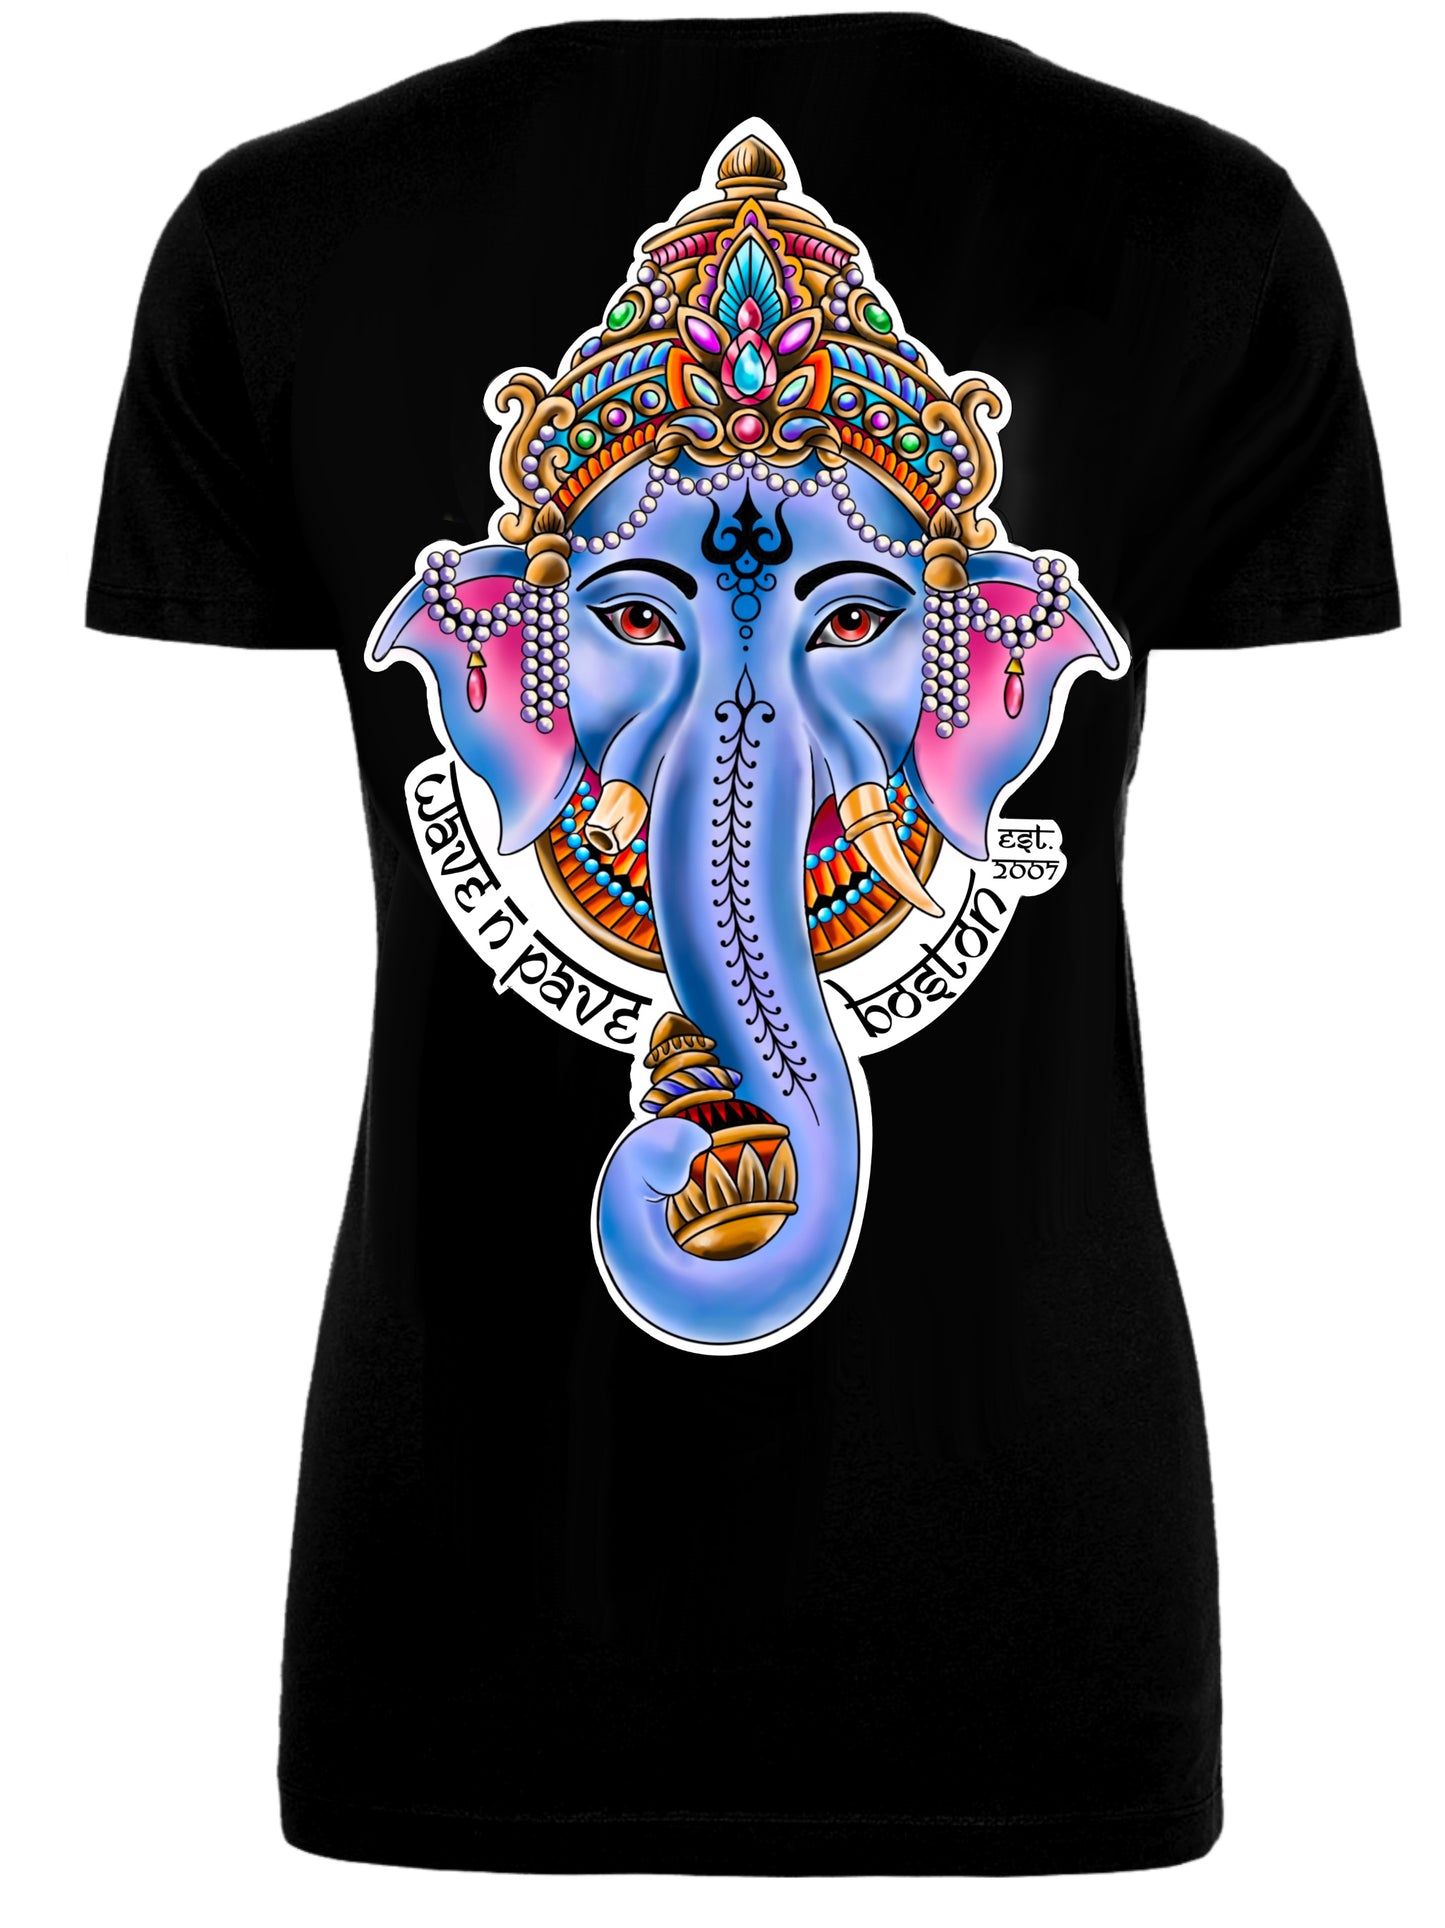 Ganesha Womans Fitted V-Neck Tee Shirt